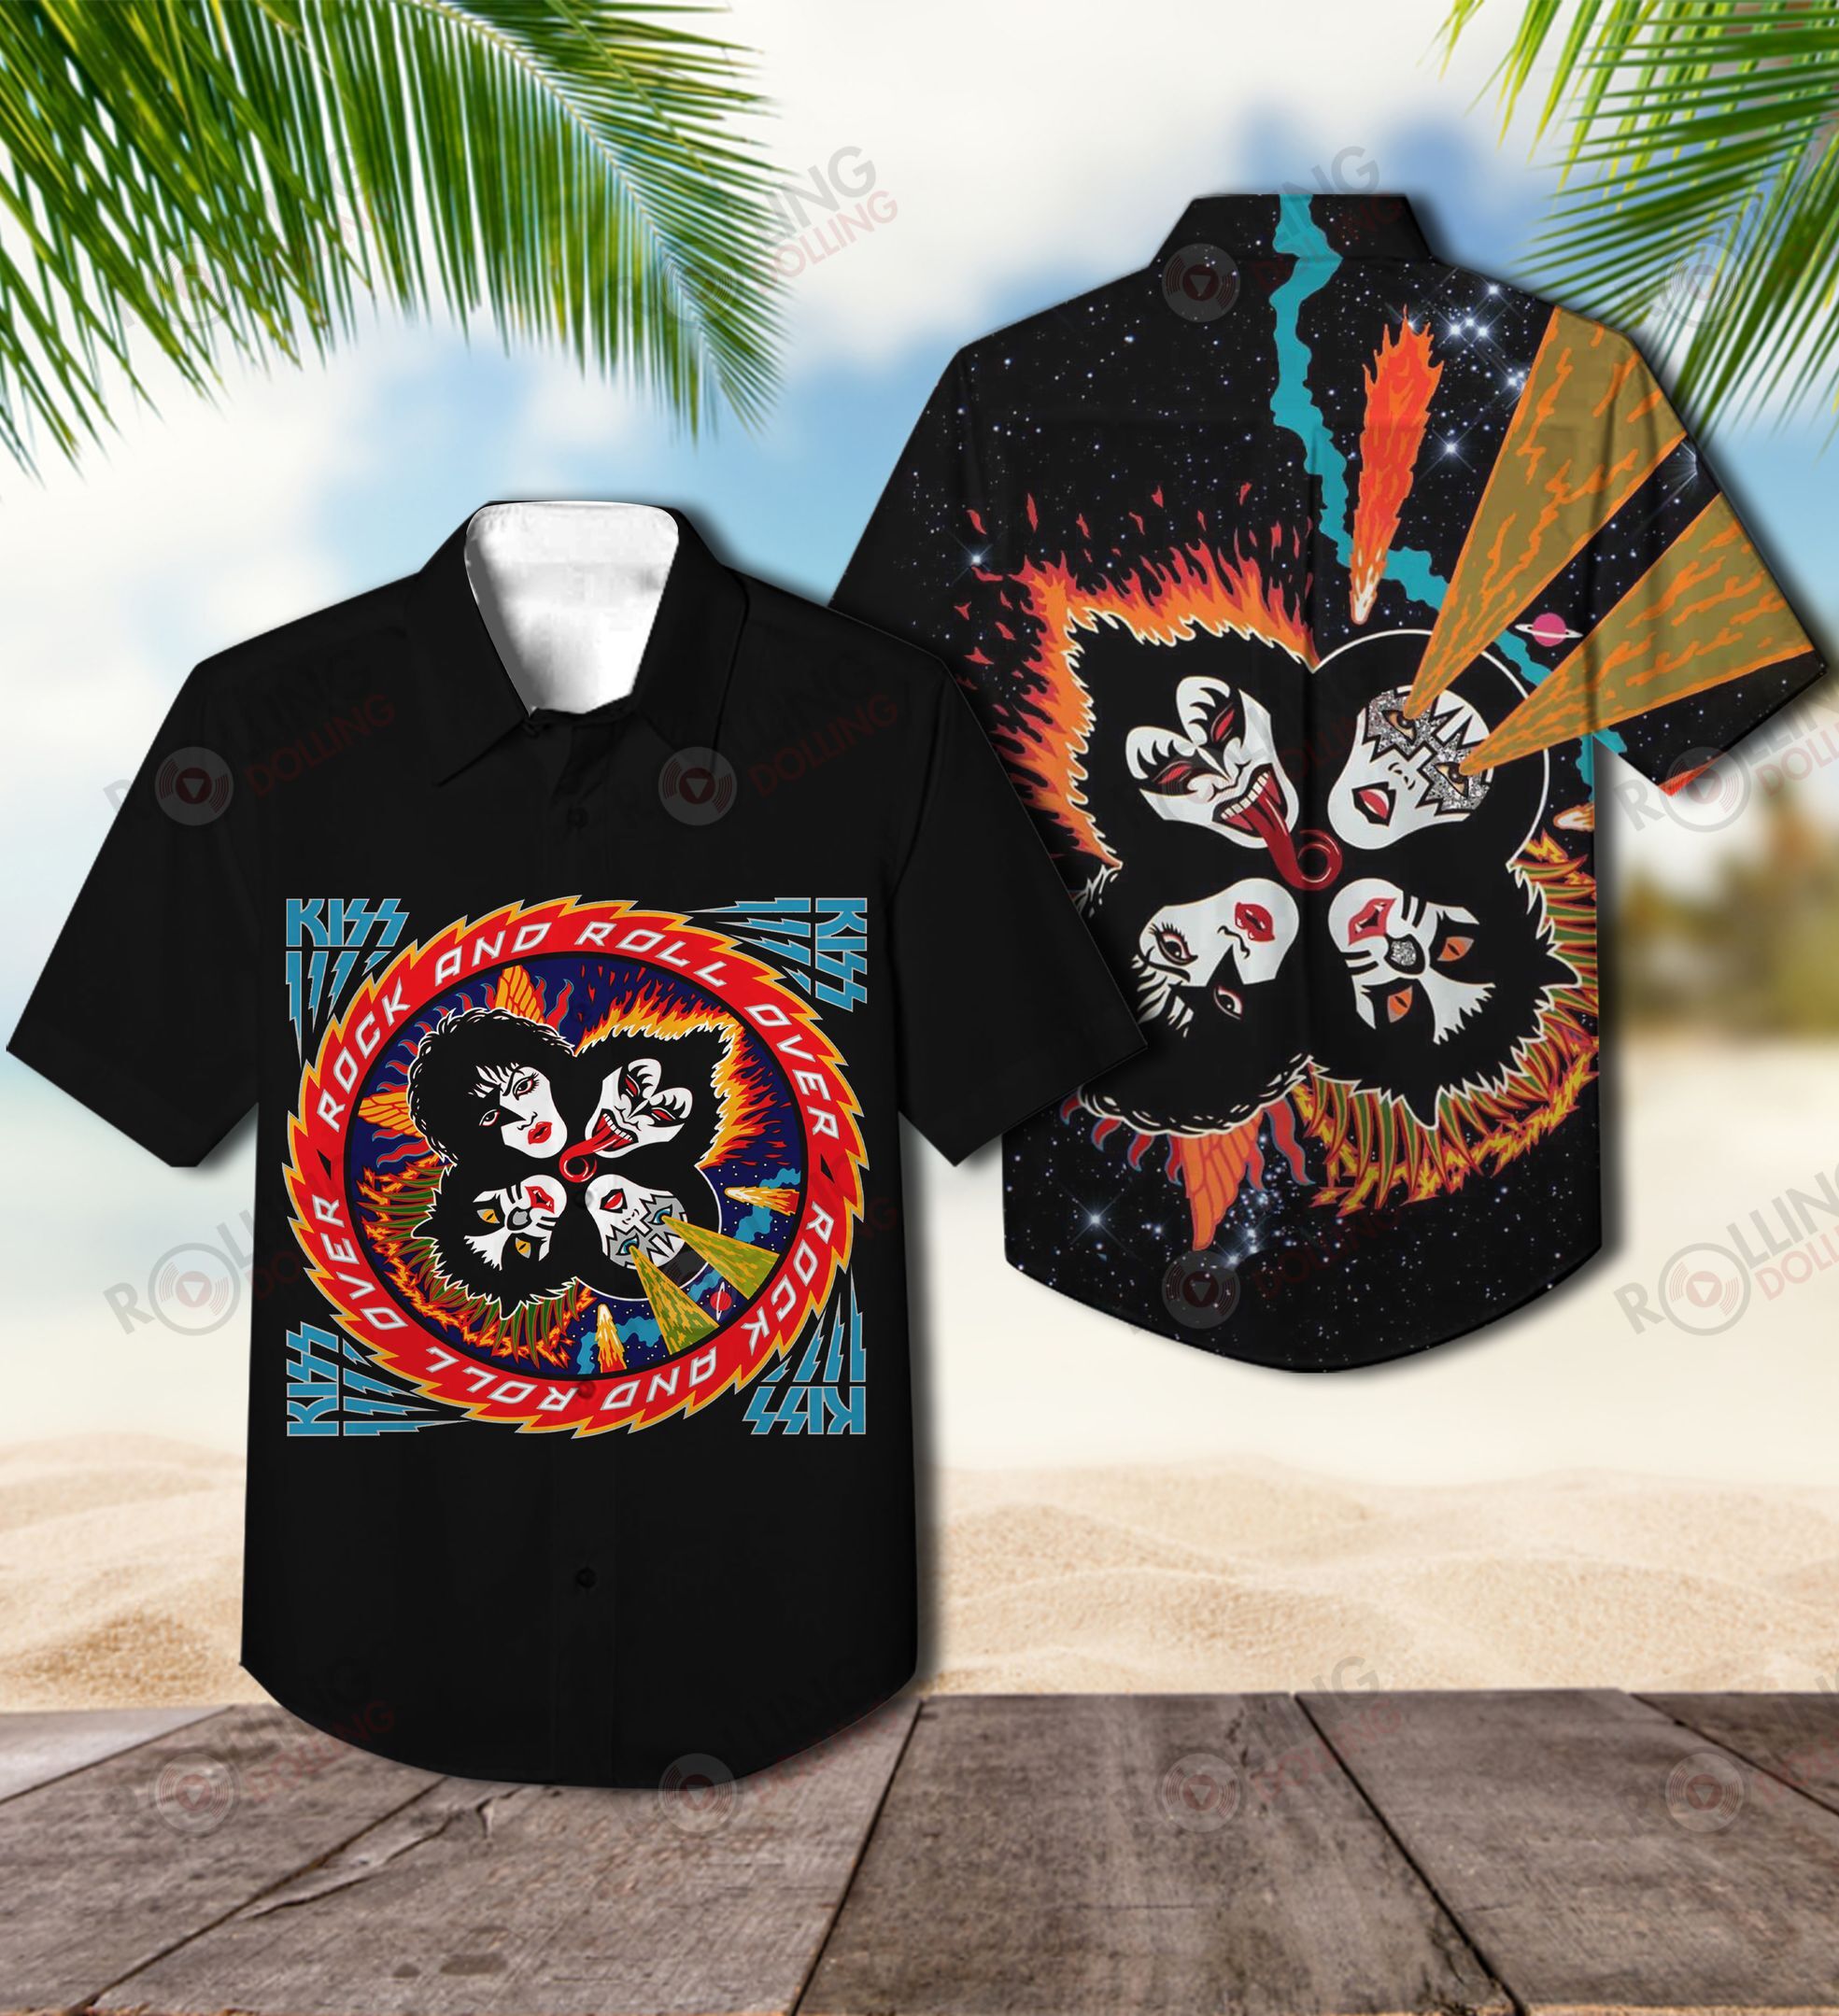 The Hawaiian Shirt is a popular shirt that is worn by Rock band fans 54